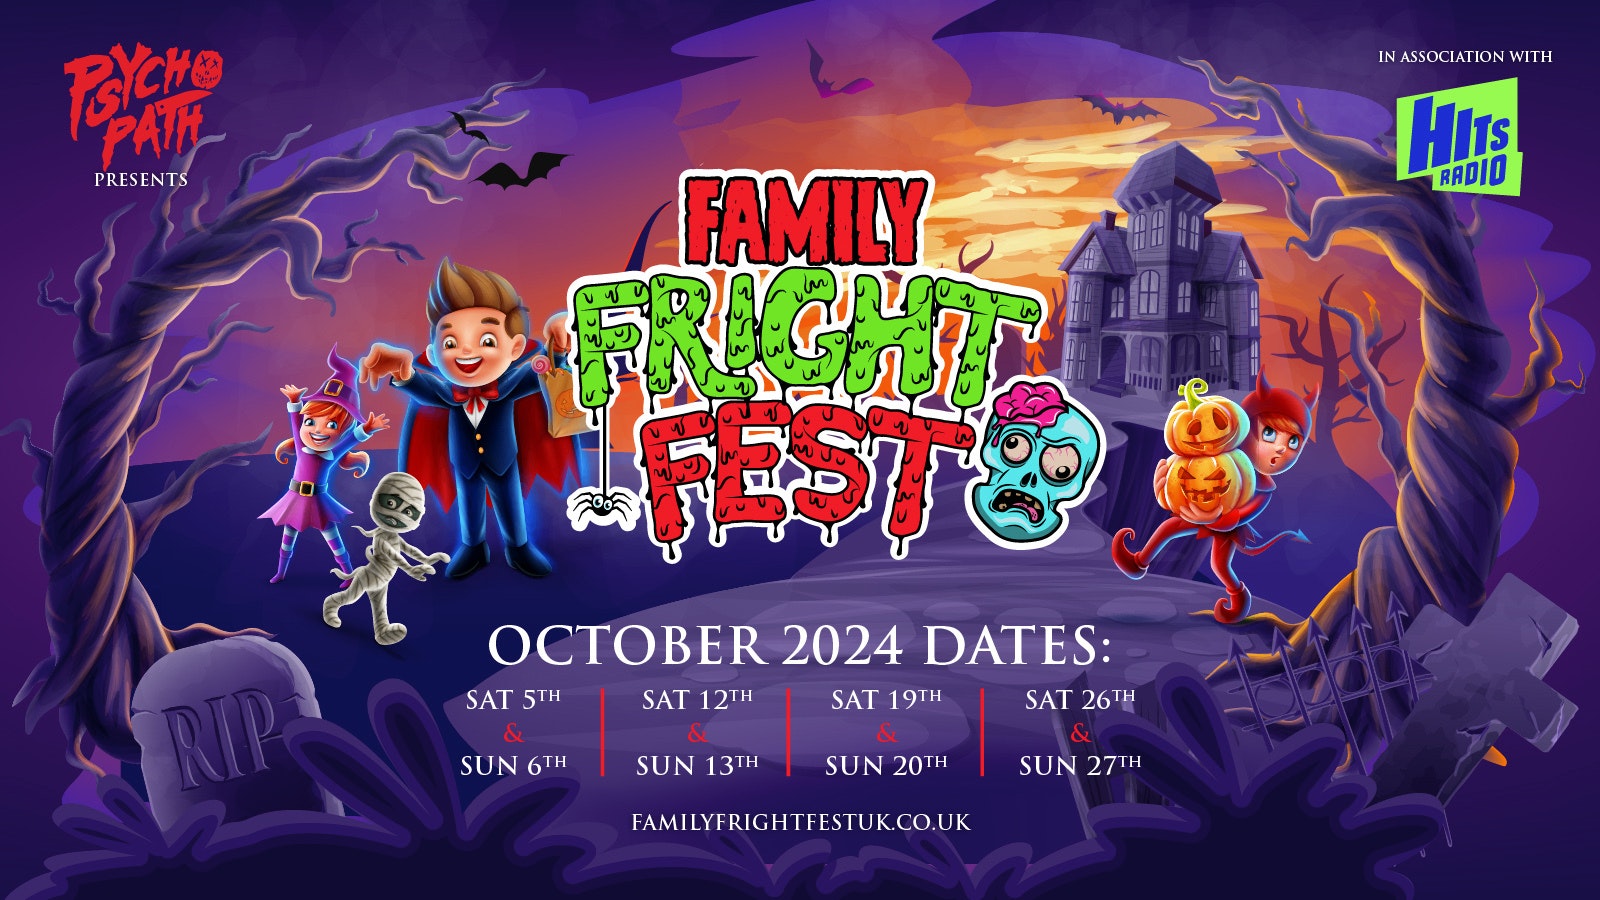 Family Fright Fest – Oct 27th